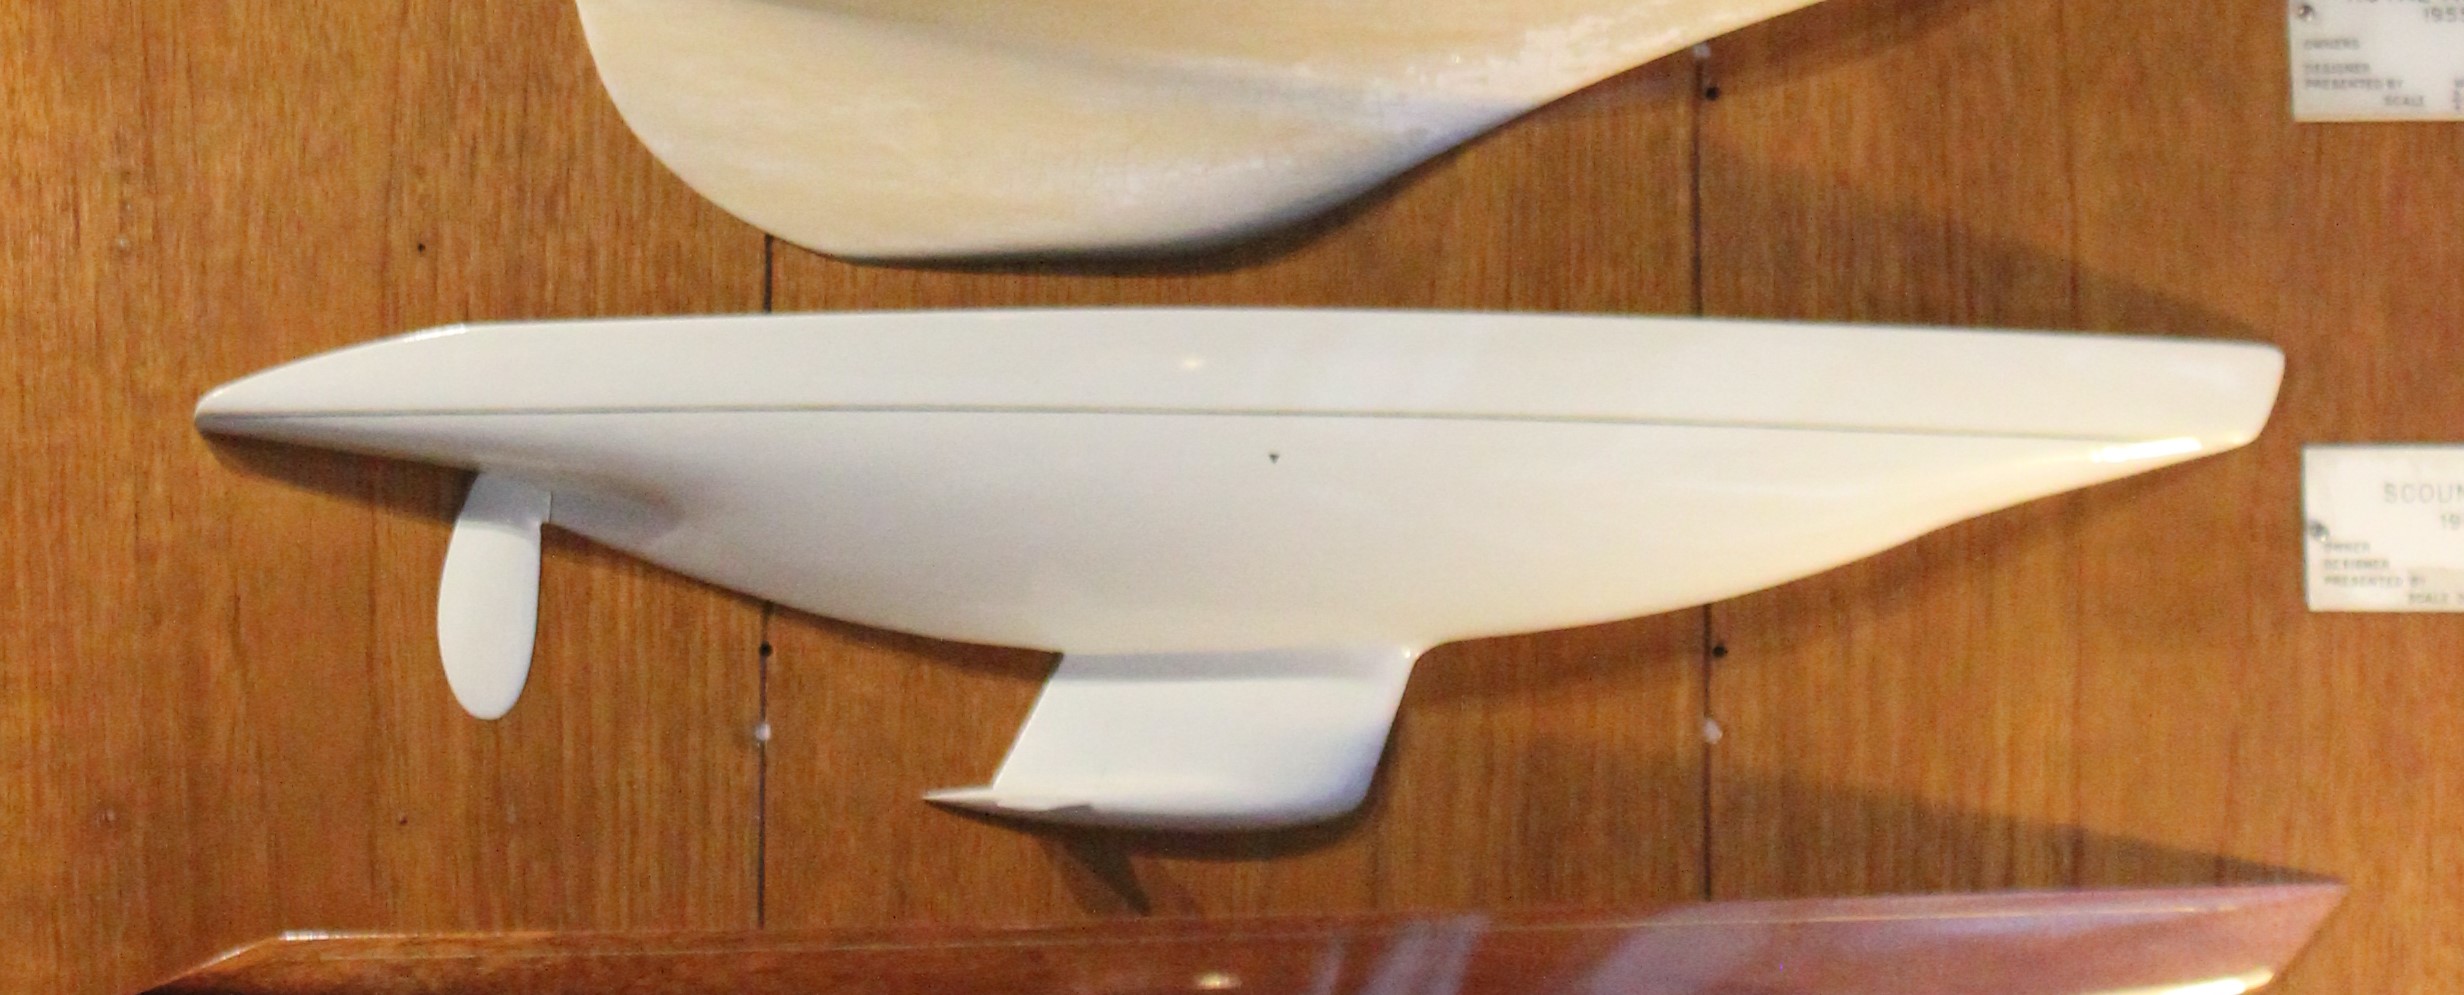 Boat model mounted on a wooden wall